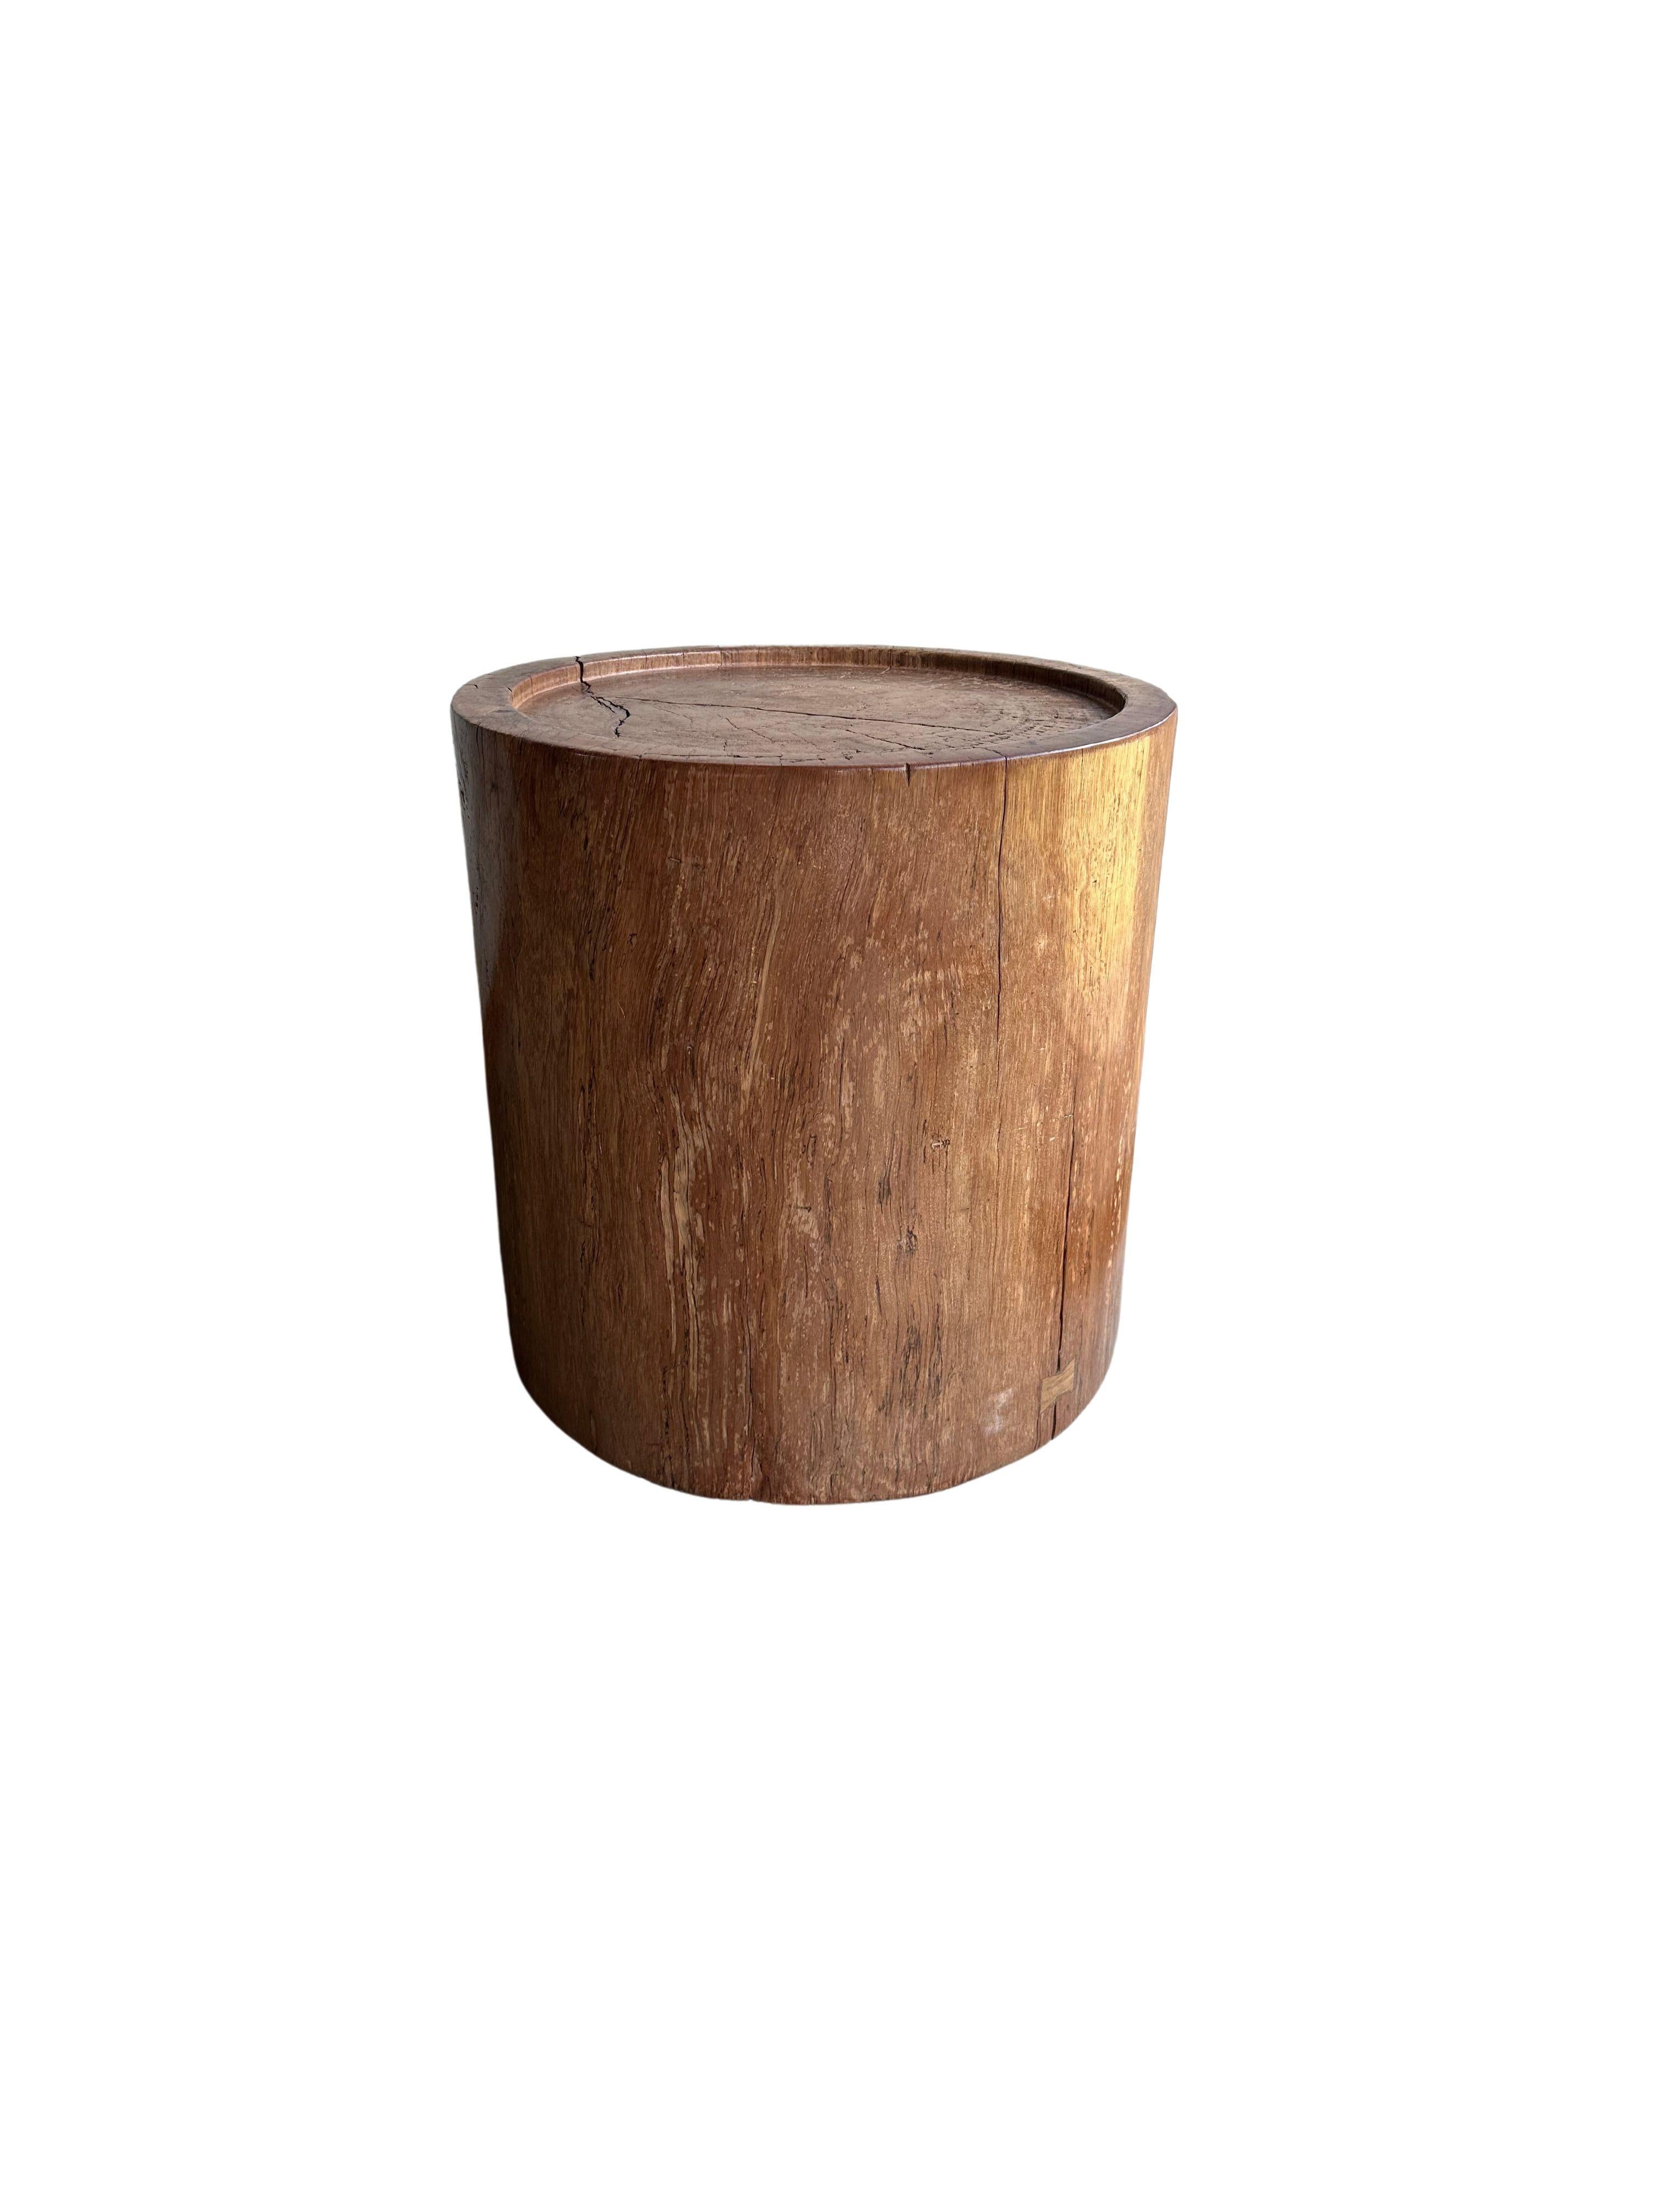 Contemporary Sculptural Meranti Wood Side Table, with Stunning Wood Textures, Modern Organic For Sale